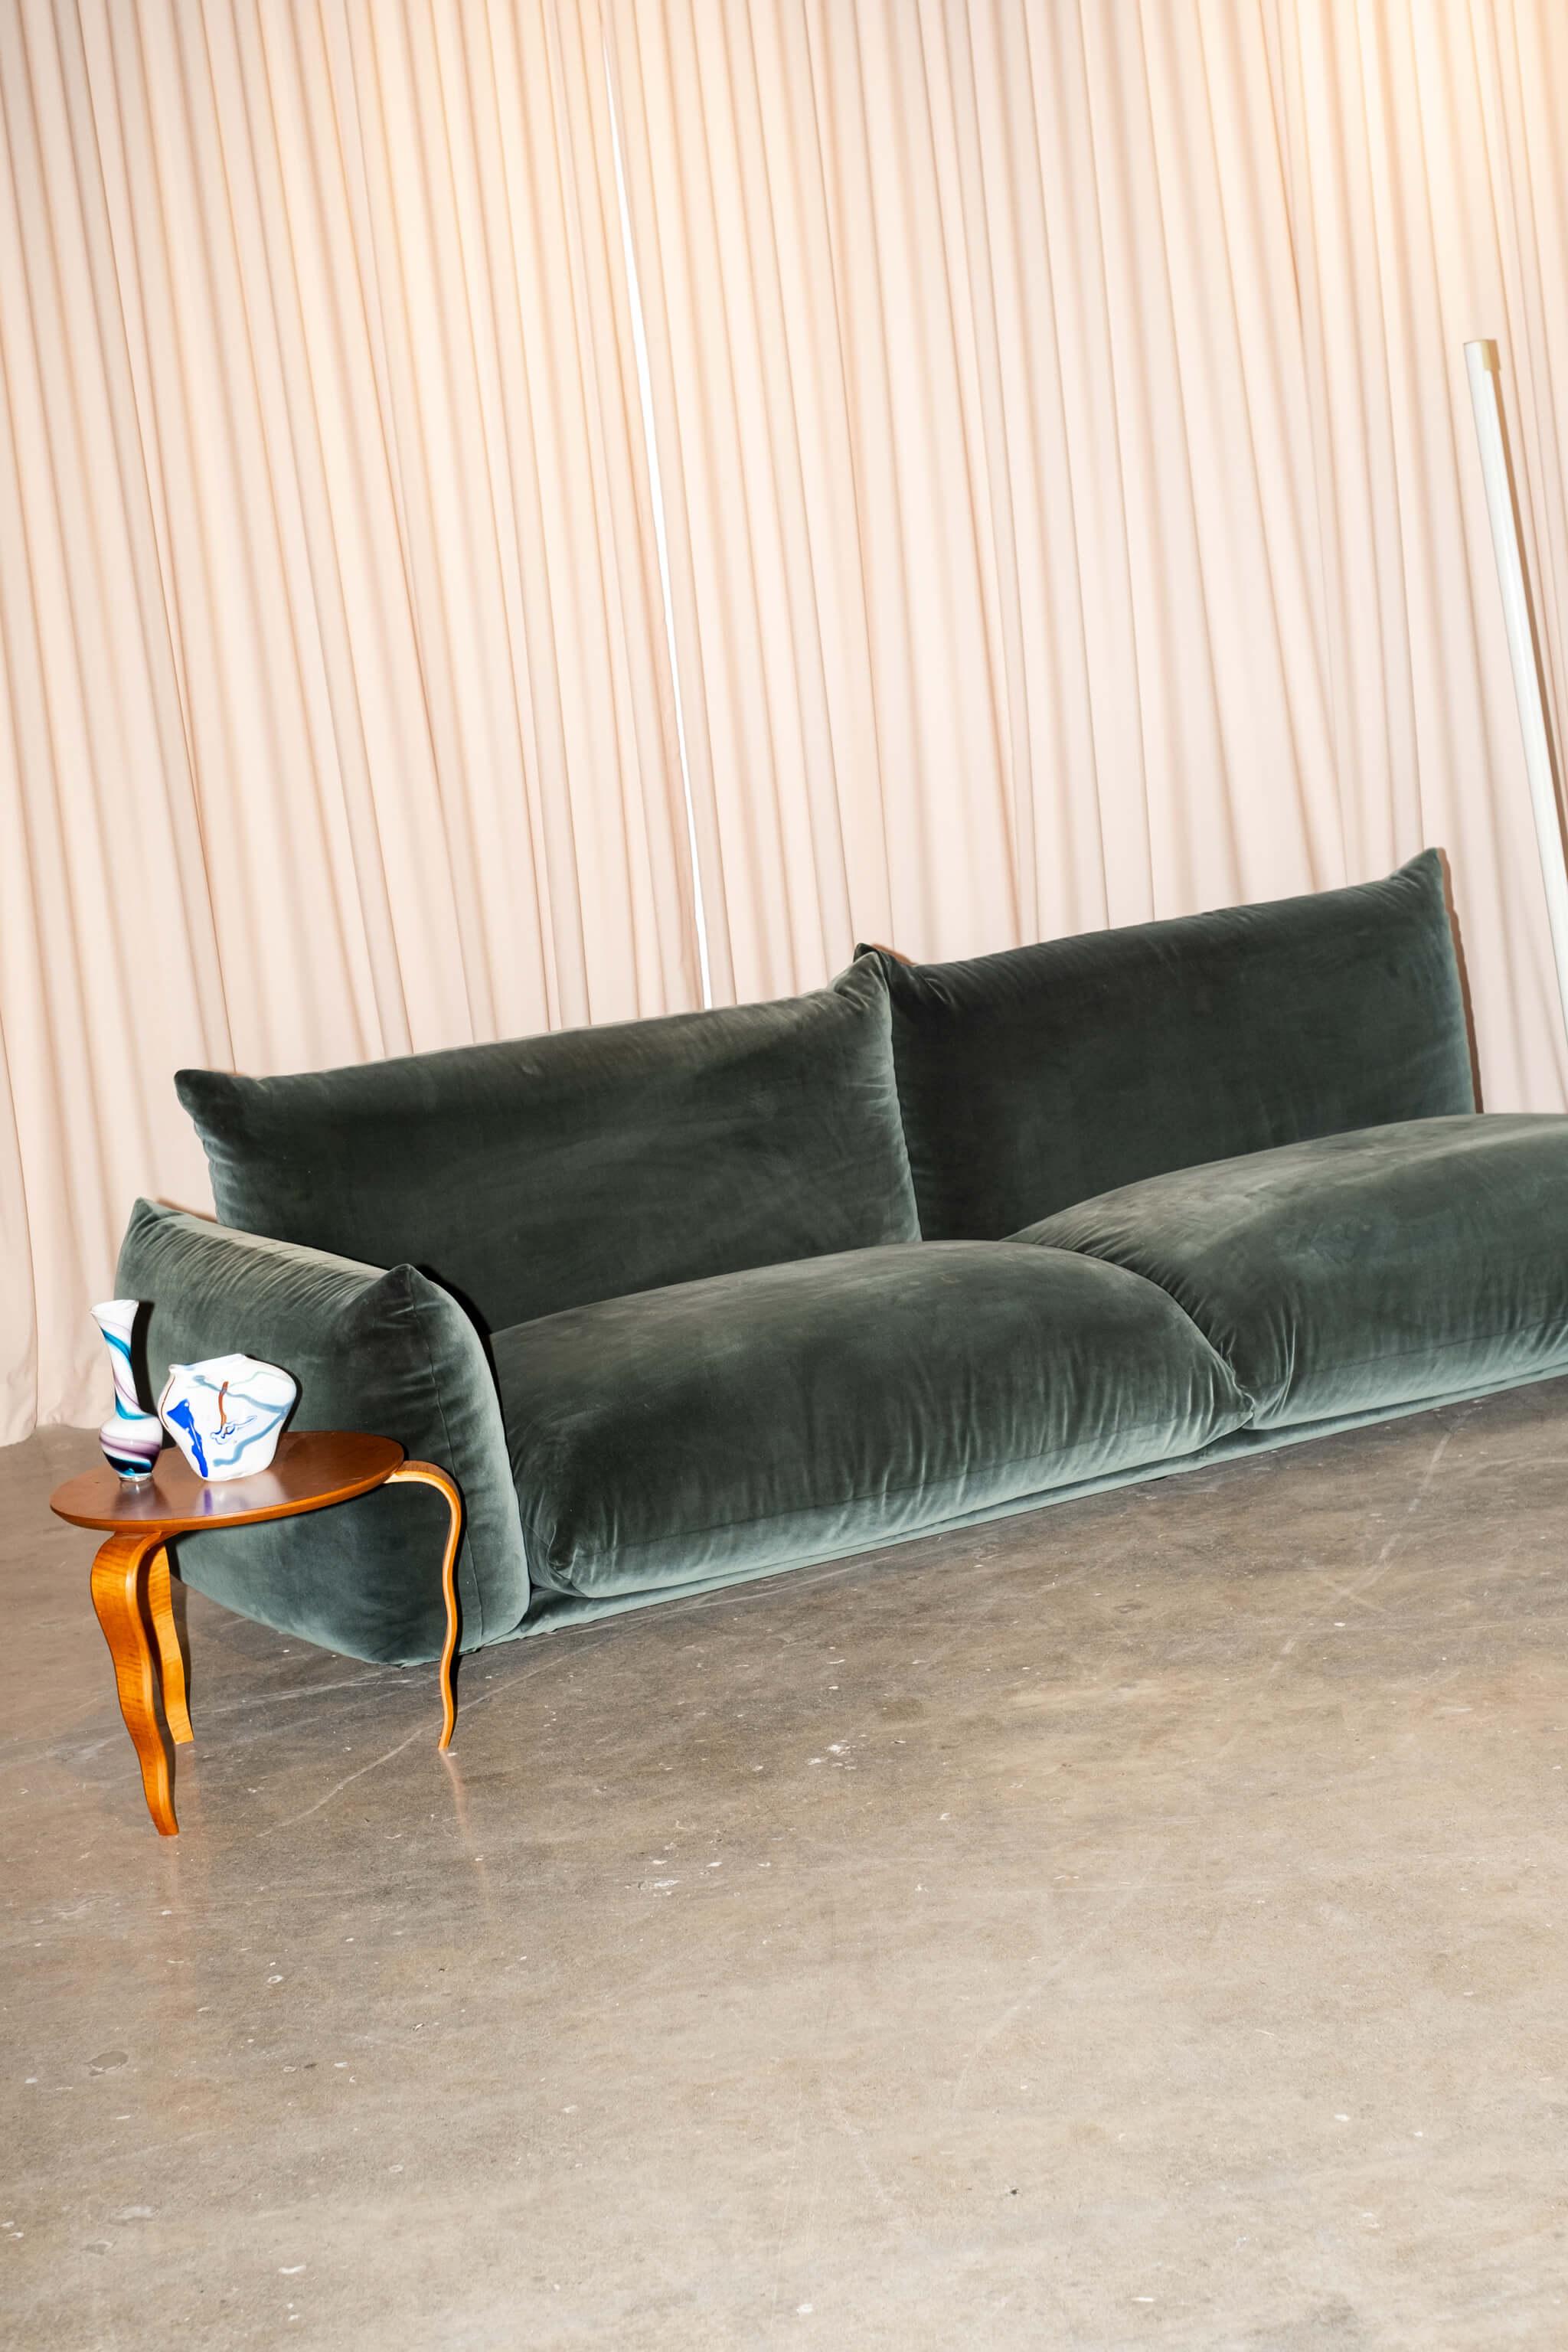 Originally designed by Mario Marenco in 1970, the namesake sofa has reached cult status. The unique rounded design and the wide modularity still make the Marenco sofa a must of contemporary furniture.

The scale of the Marenco is not shy. (Although